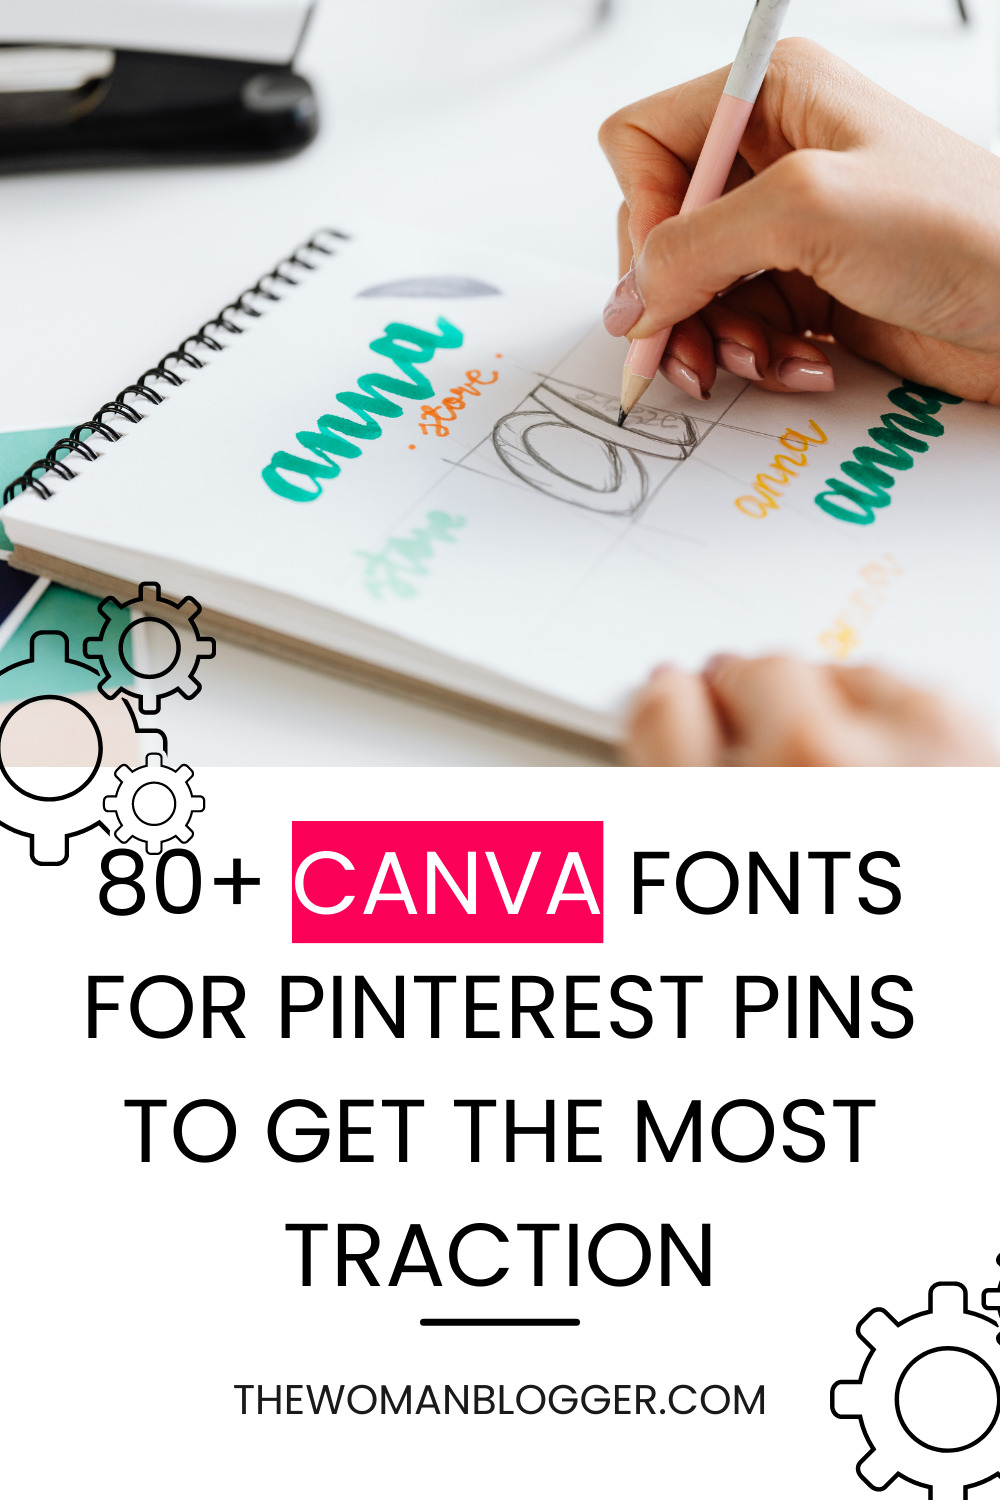 You are currently viewing 80+ Canva Fonts for Pinterest Pins to get the most traction